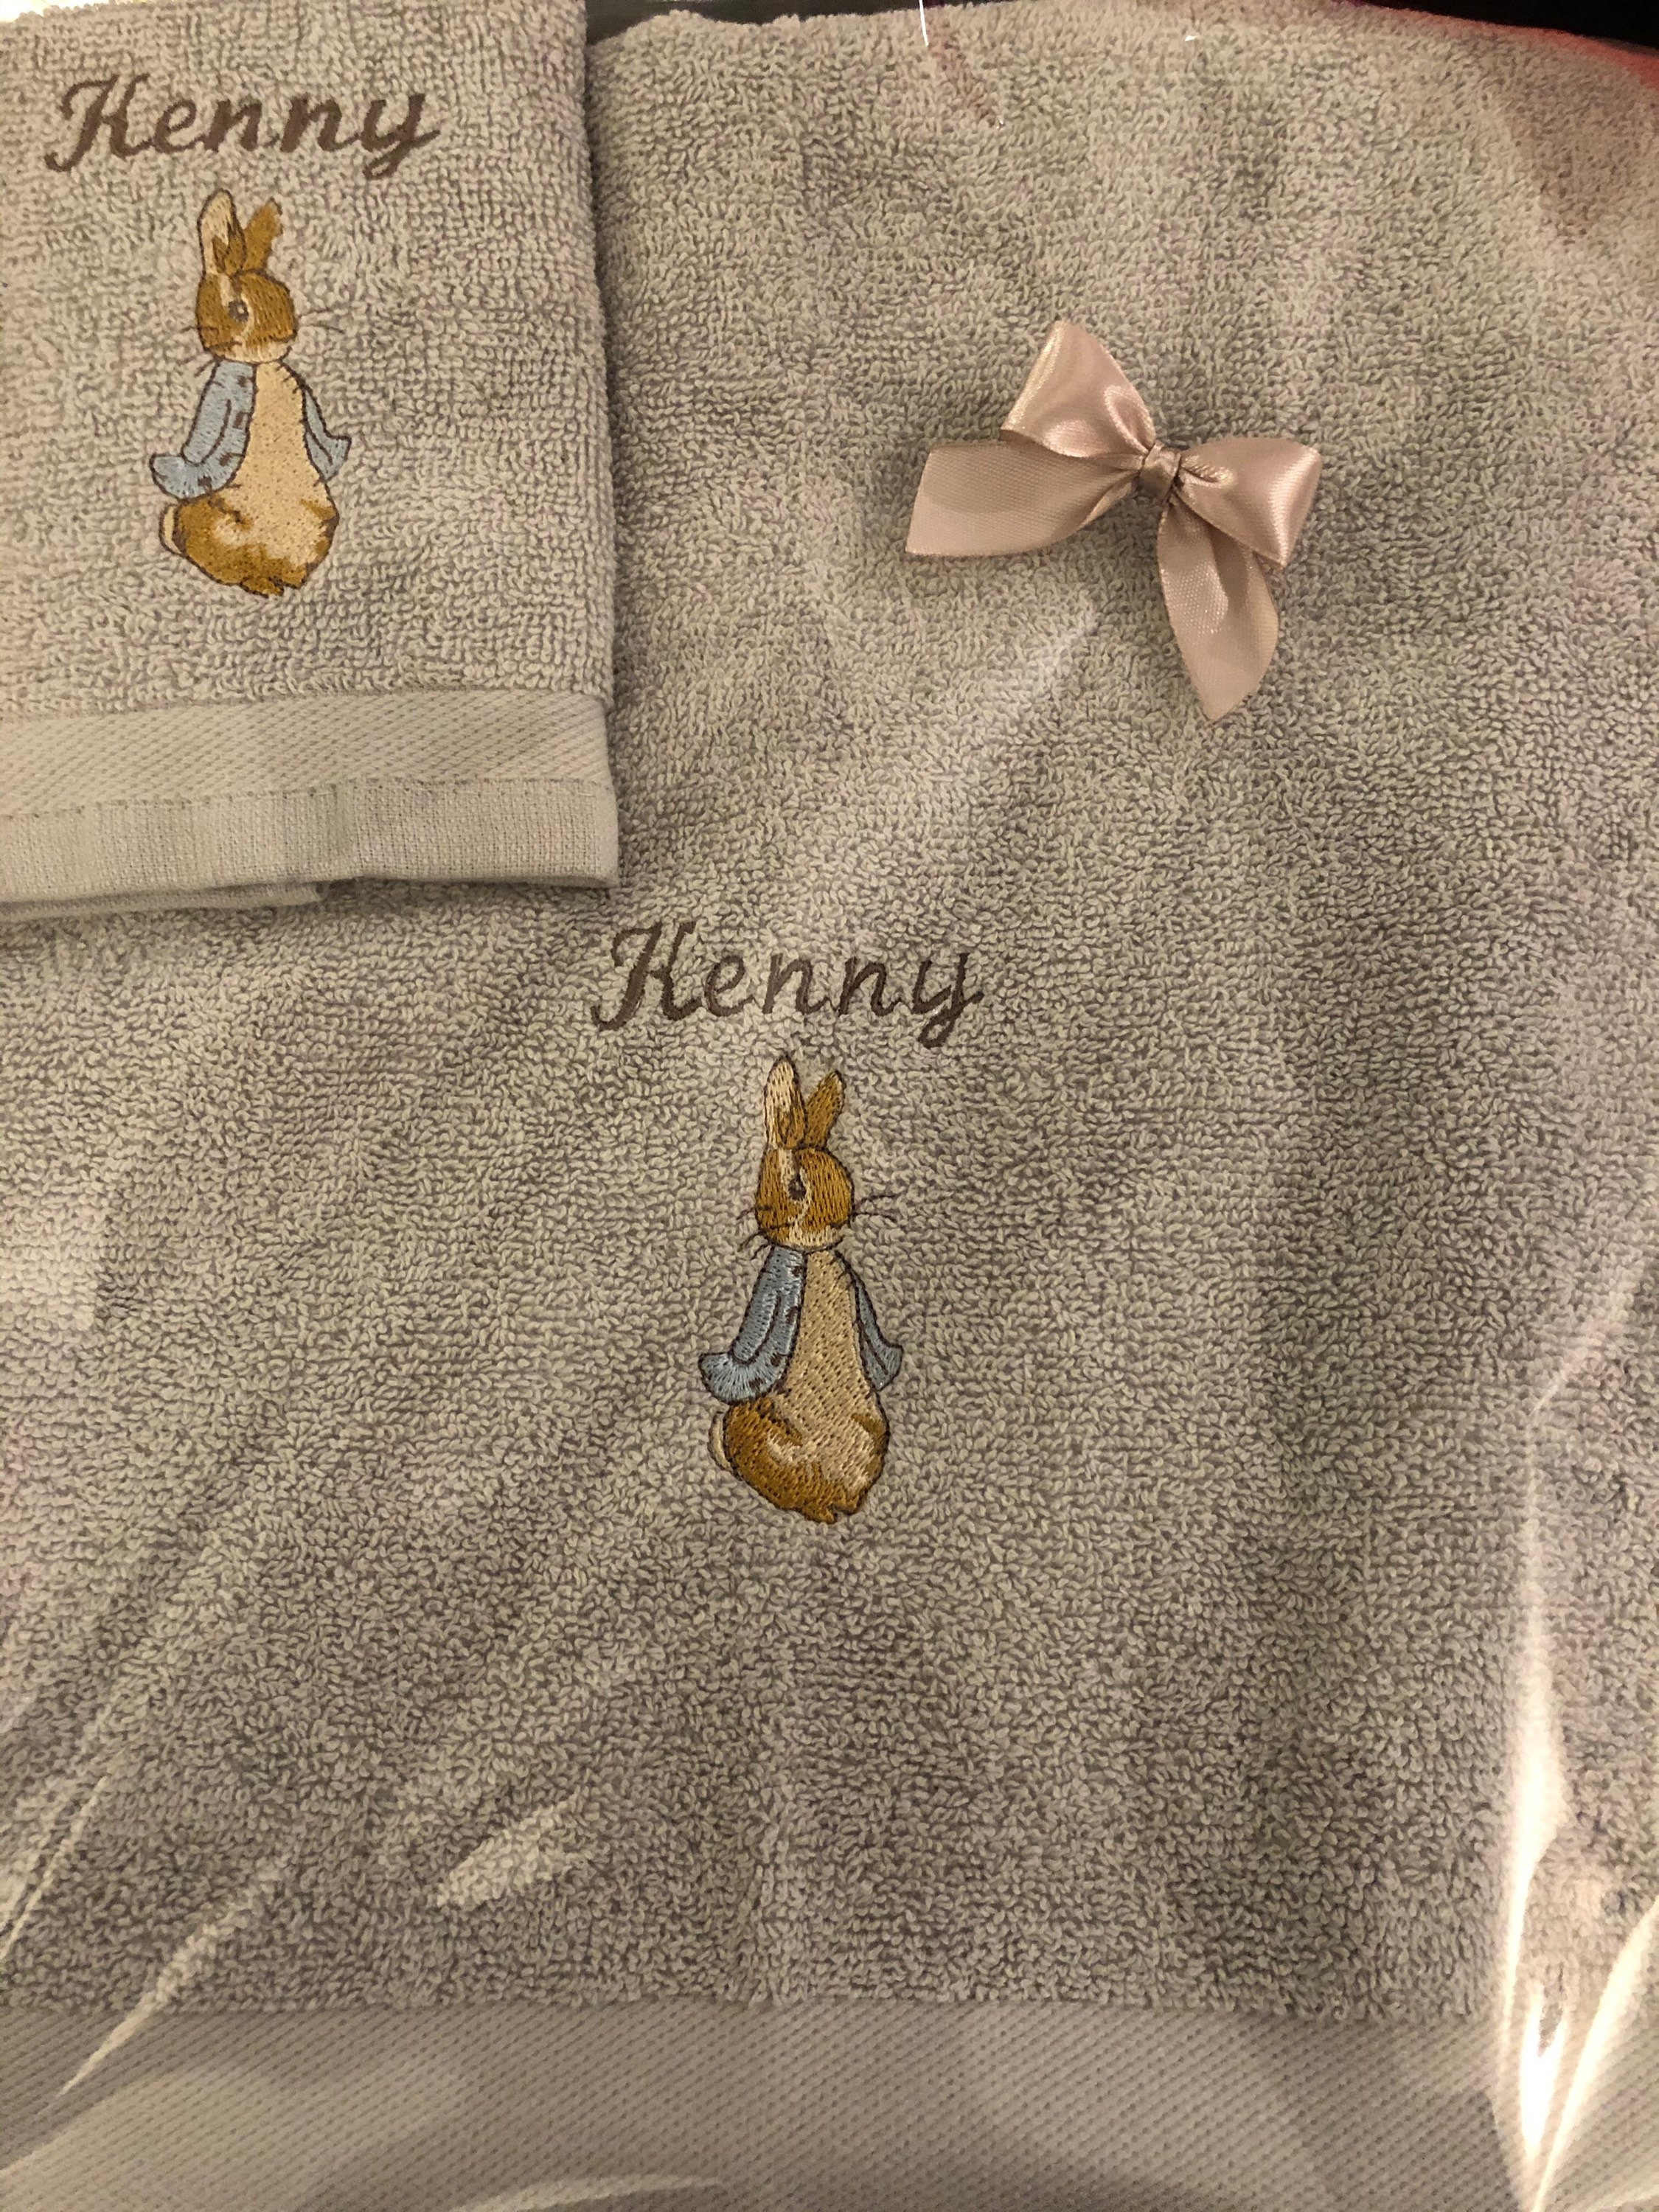 PERSONALISED BEATRIX POTTER TOWEL SET PETER RABBIT GIFT WRAPPED 